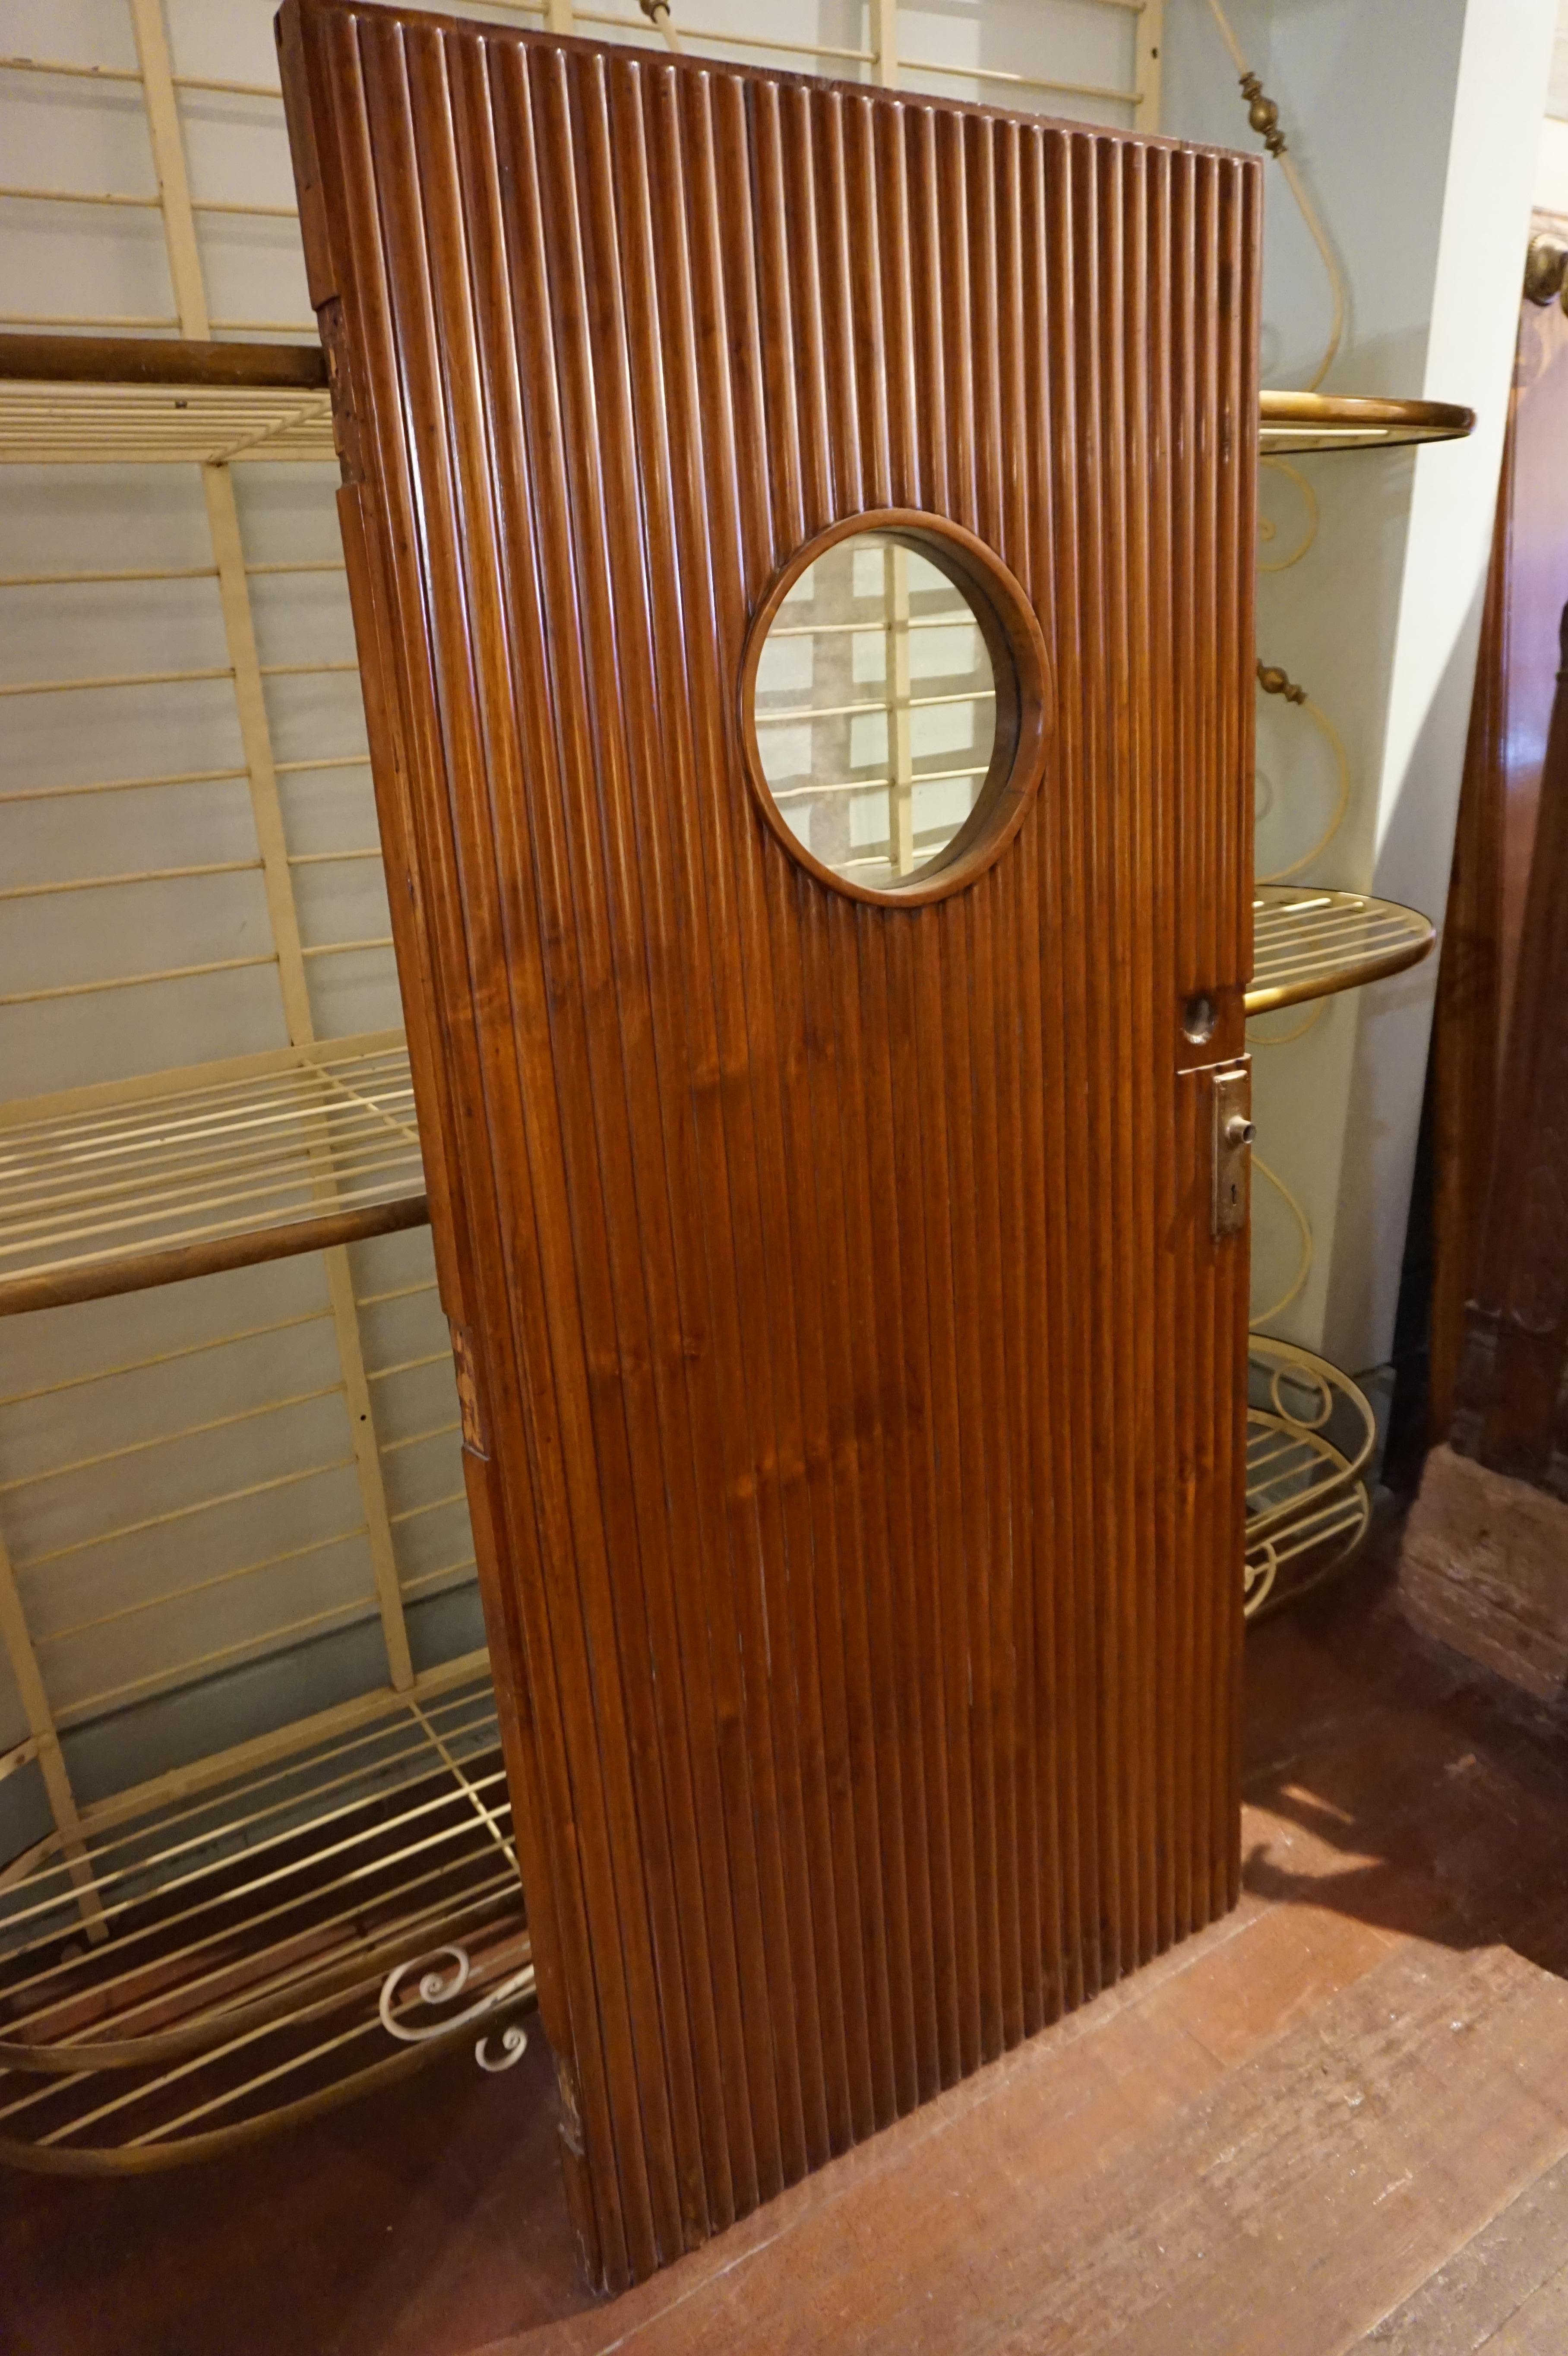 Solid teak hand carved exquisite ship door with porthole and fine joinery work. Hardware remnant of brass handle less hinges intact. Measures: 2